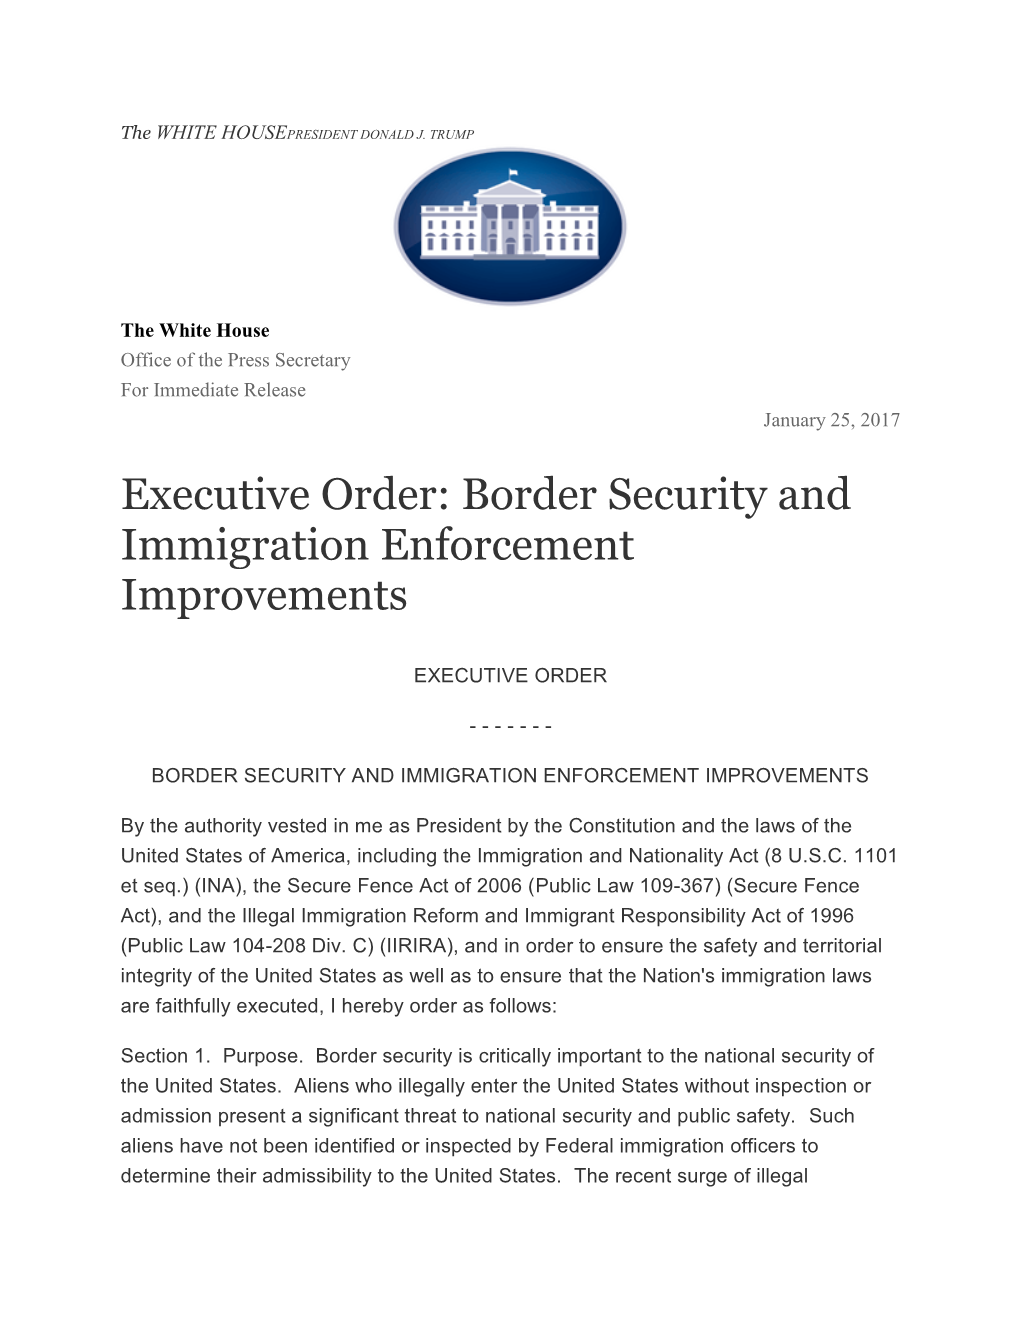 Executive Order: Border Security and Immigration Enforcement Improvements